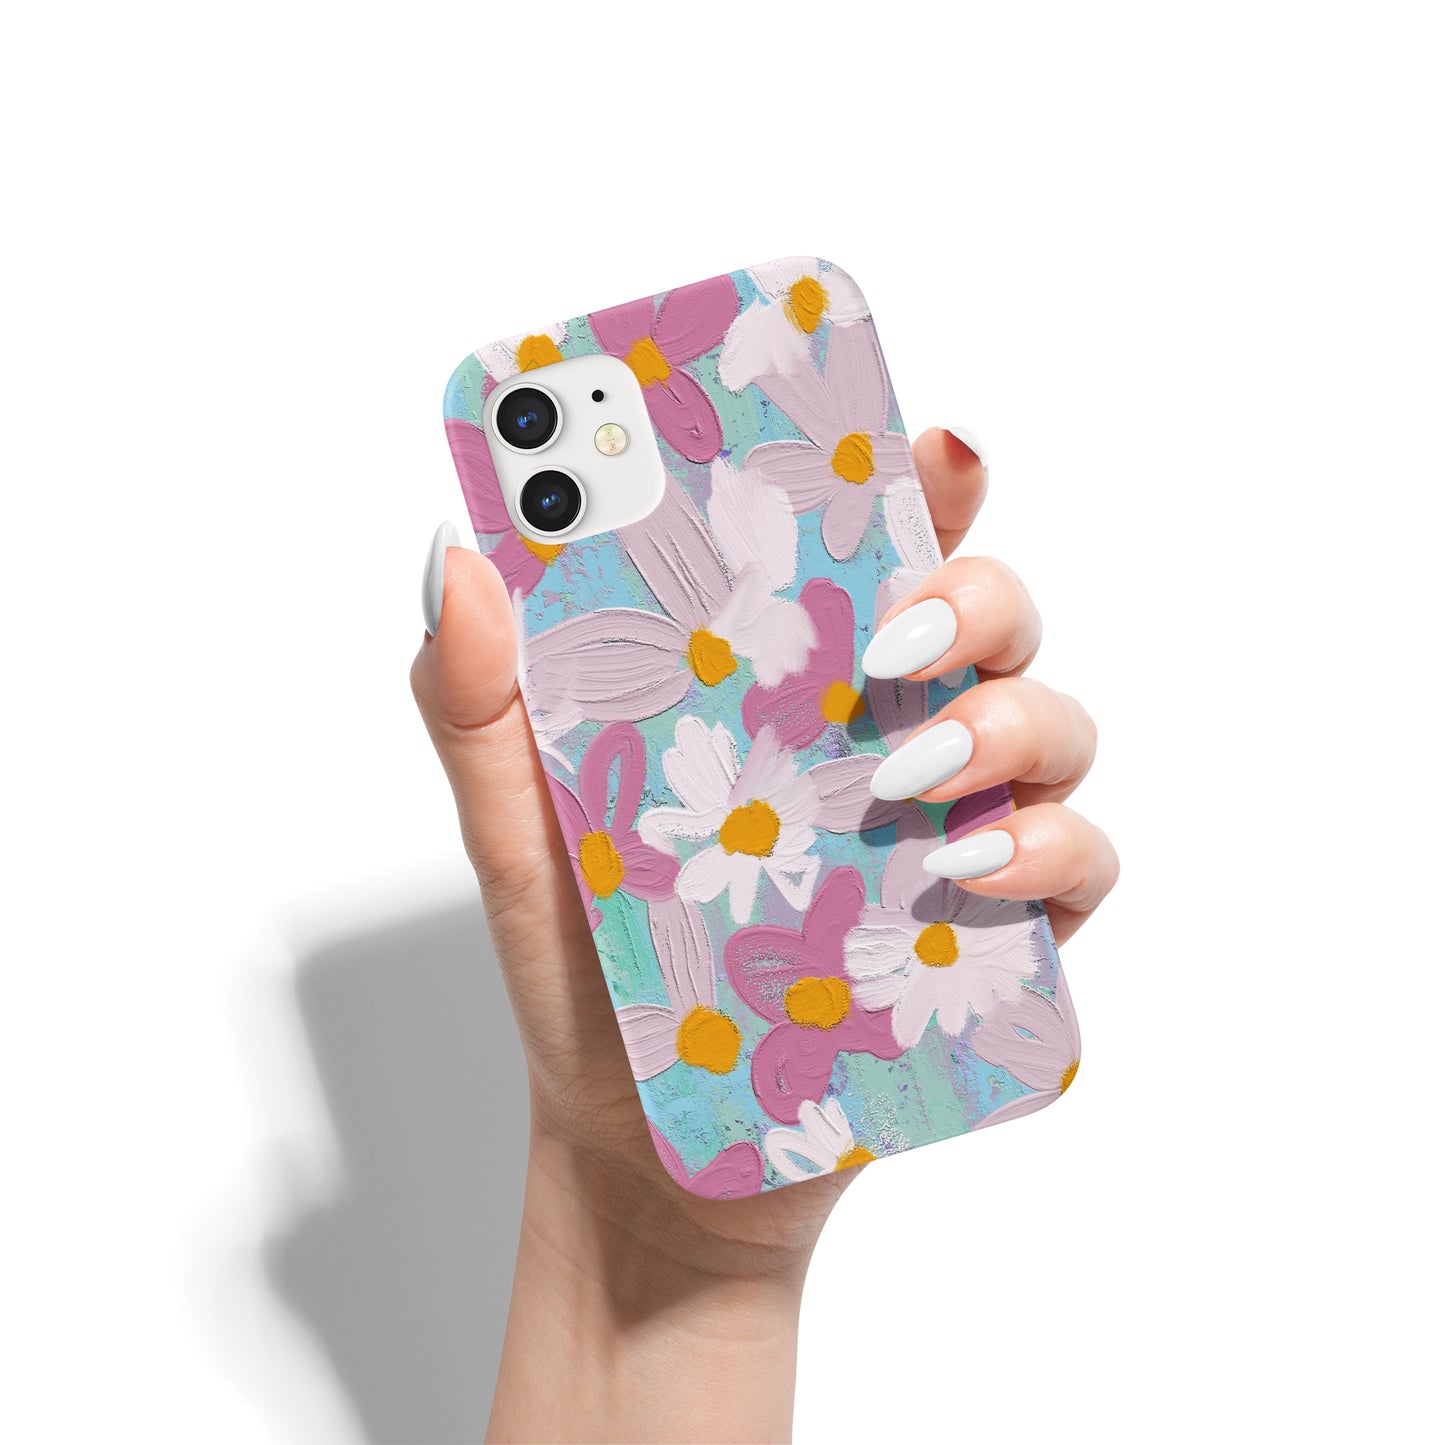 Blue Painted Flowers iPhone Case